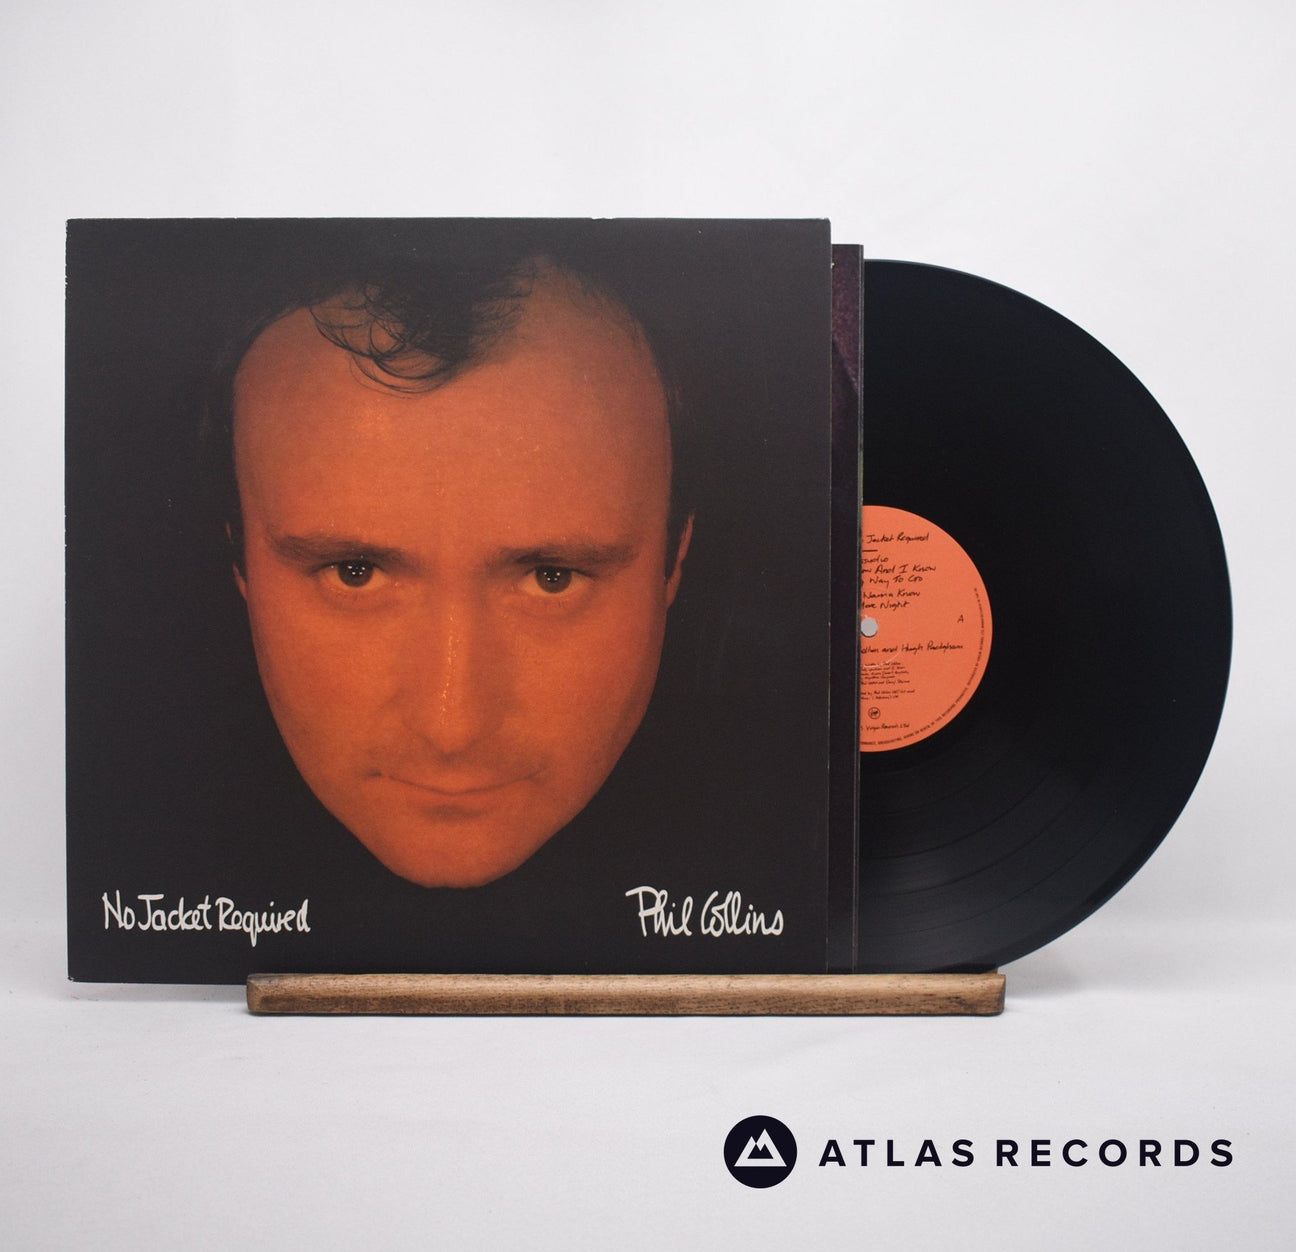 Phil Collins No Jacket Required LP Vinyl Record - Front Cover & Record